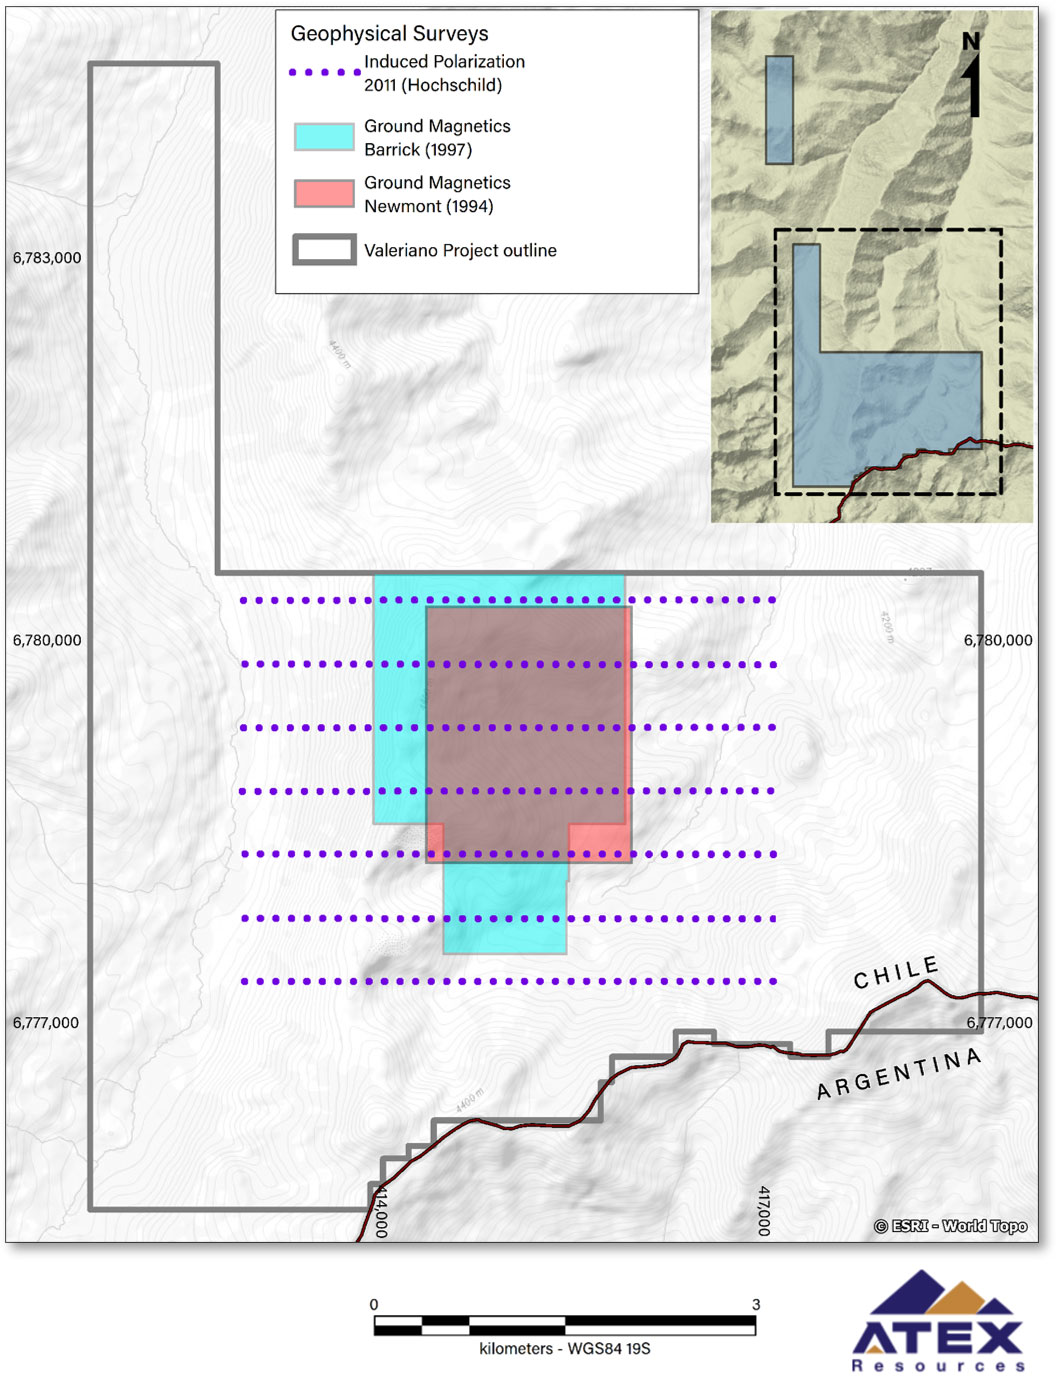 Figure 3: Areas Covered by Geophysical Surveys Pre-ATEX